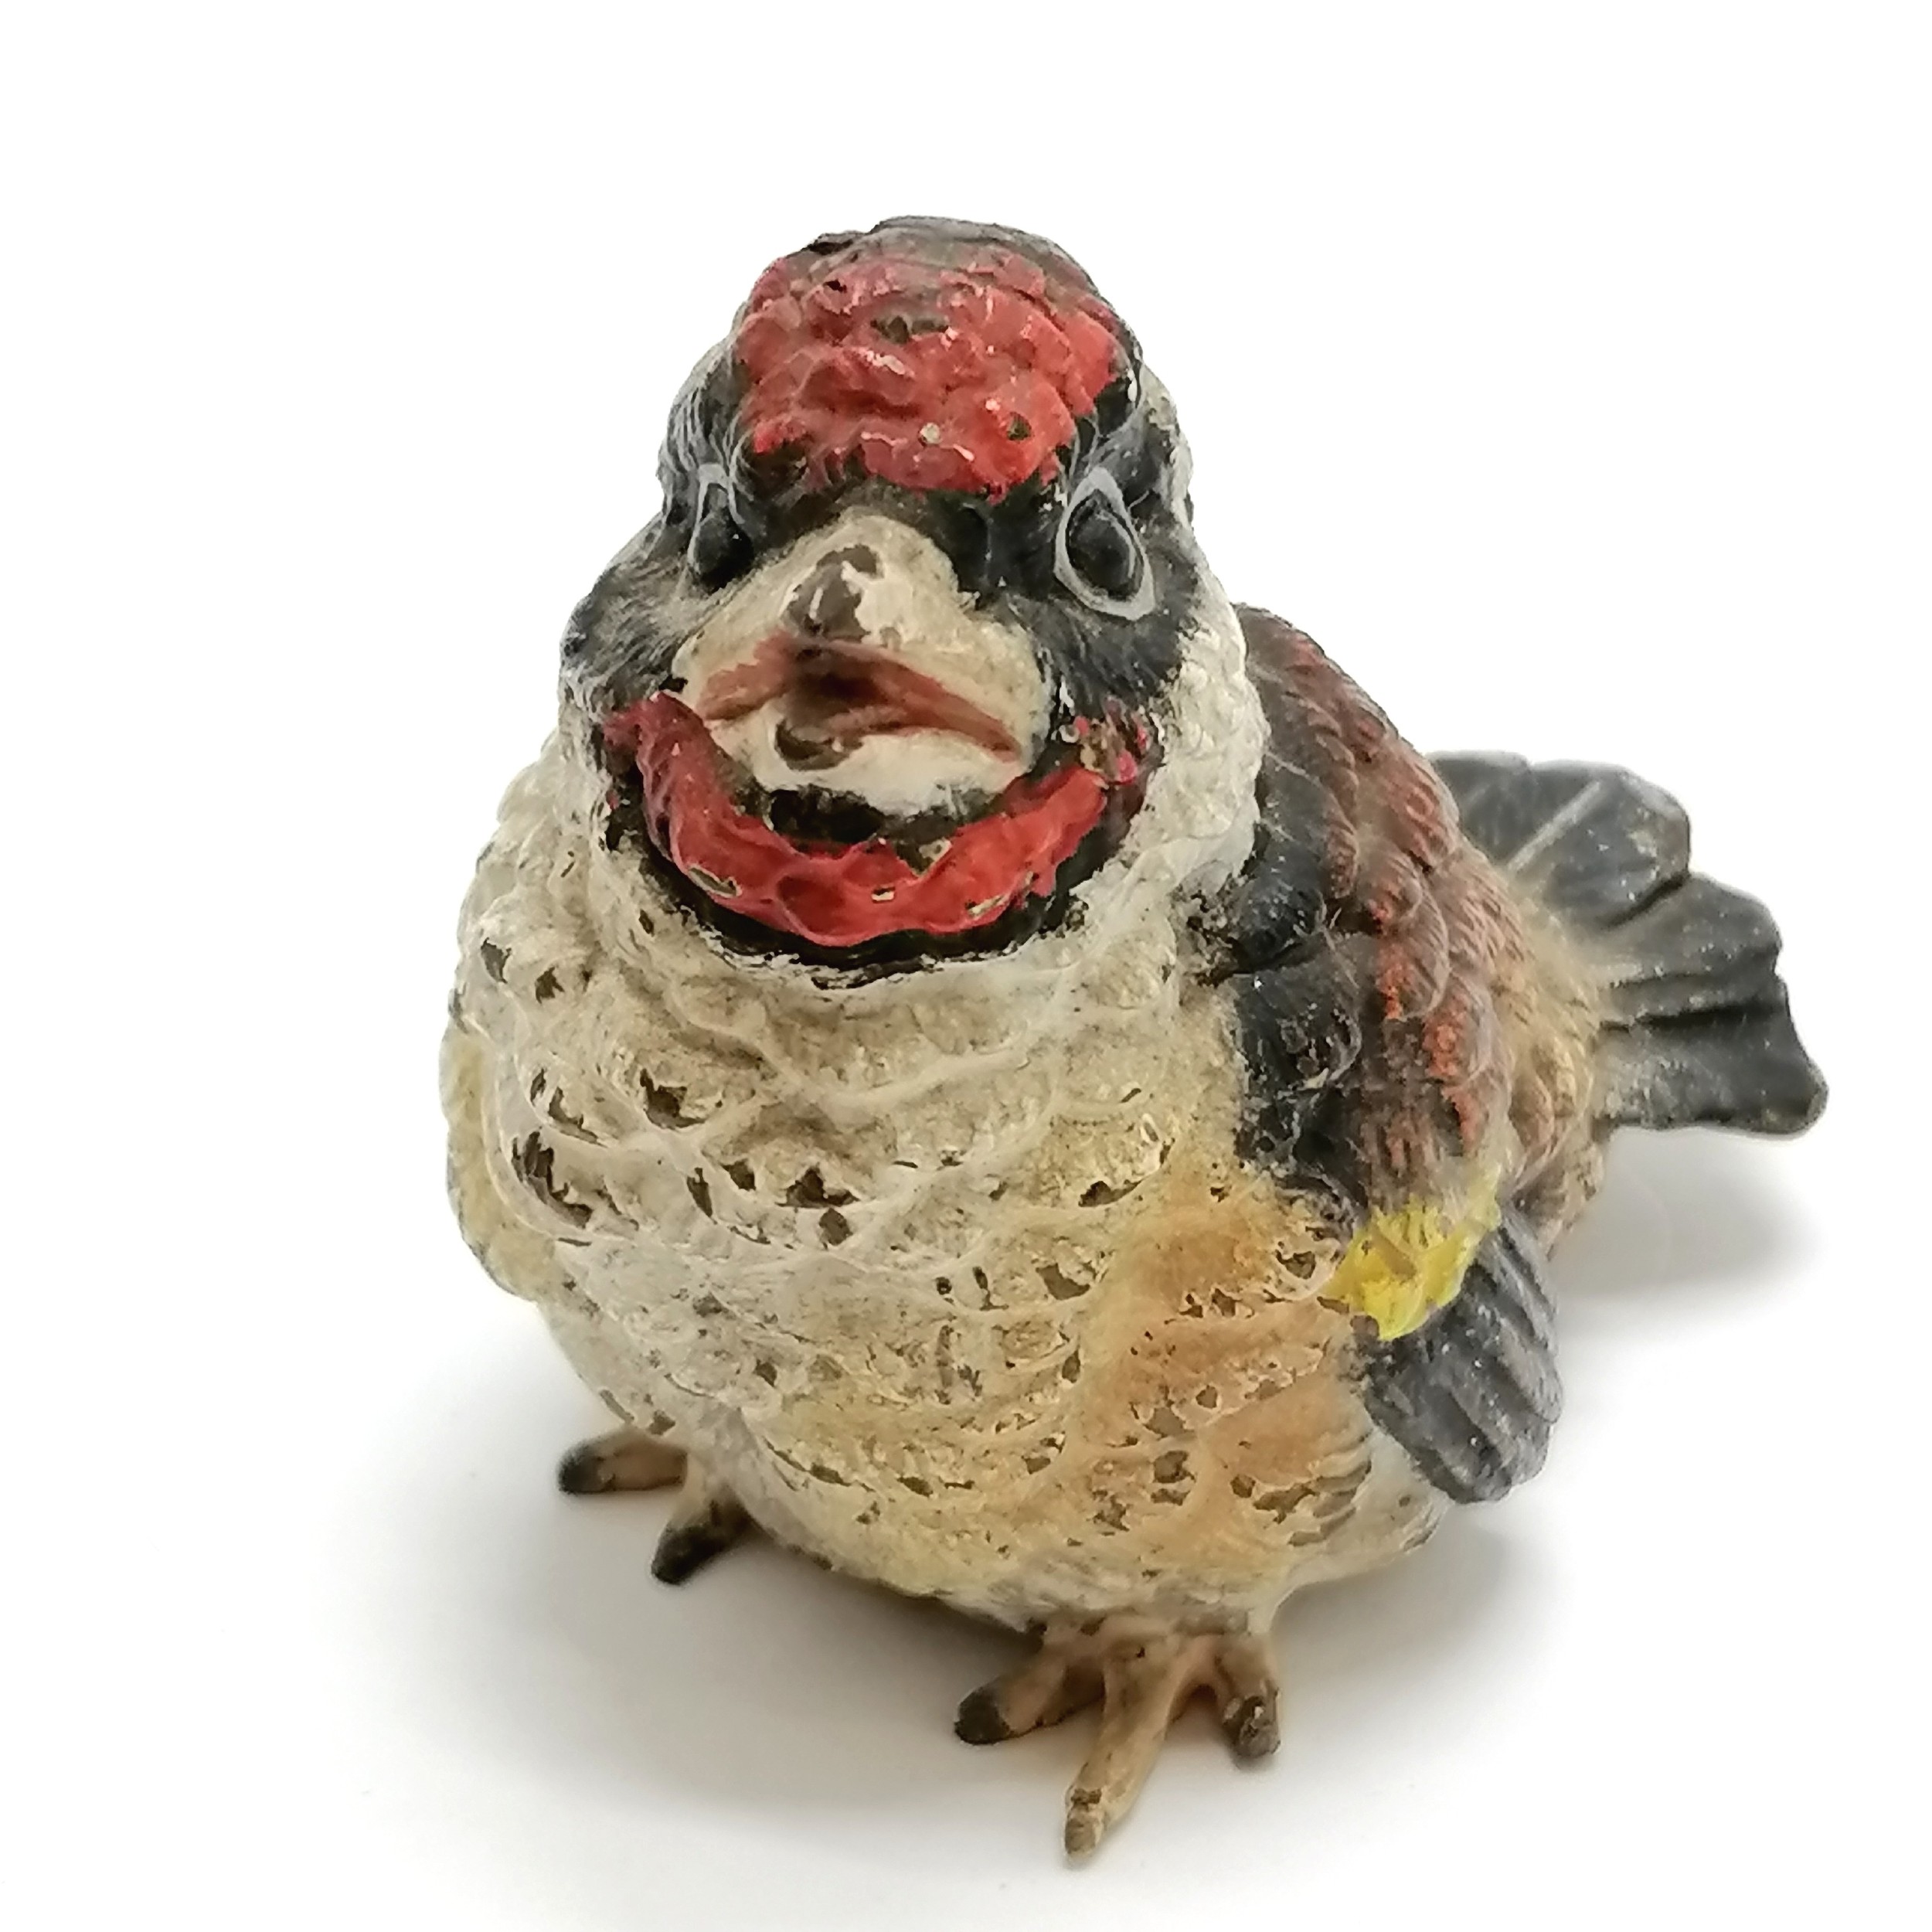 Antique Austrian cold painted bronze of a baby goldfinch - 4.5cm high (marked Austria to base) on an - Image 4 of 5